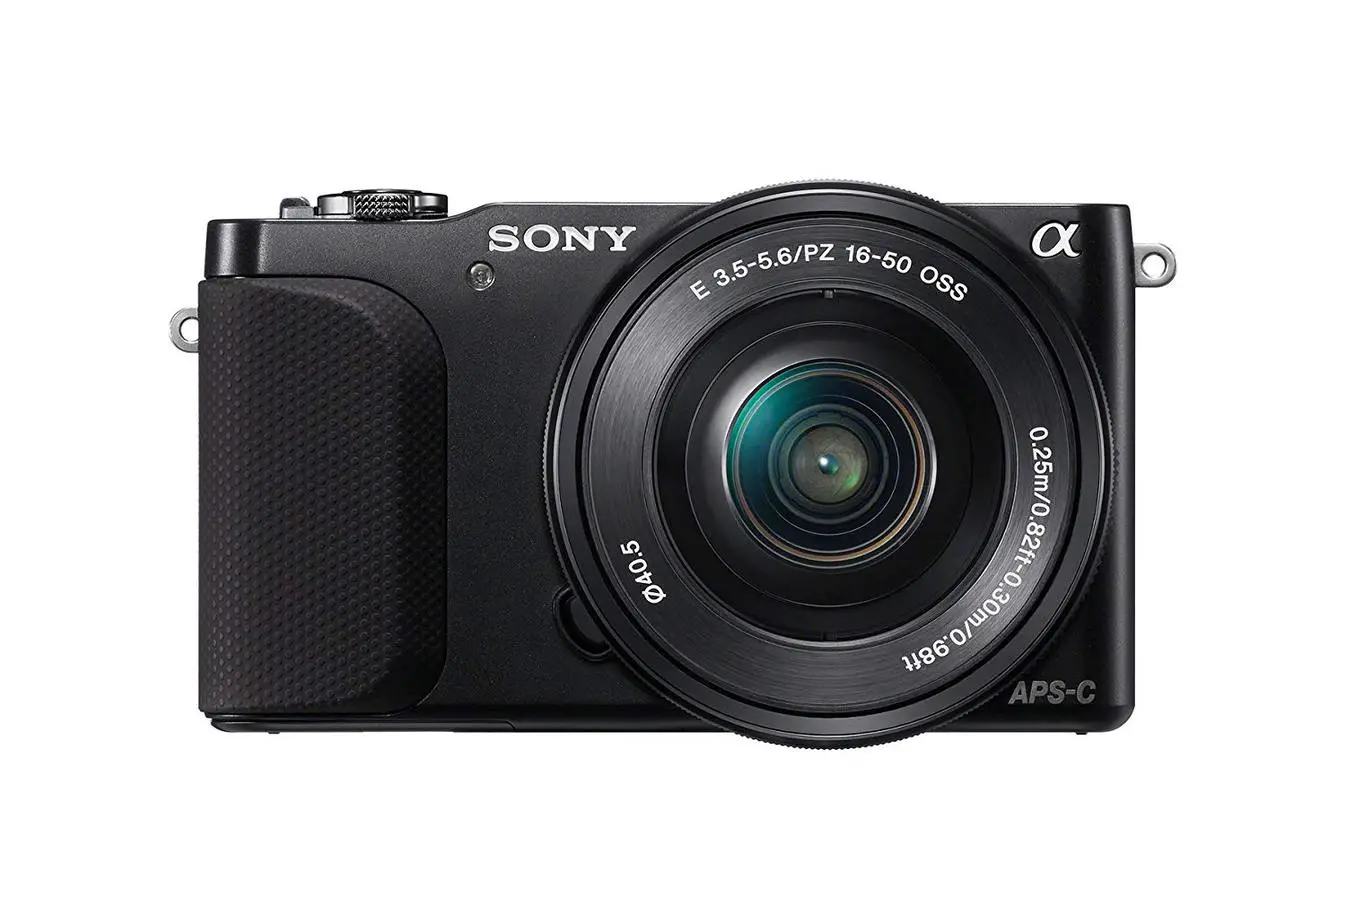 Front view of the Sony NEX-3N camera